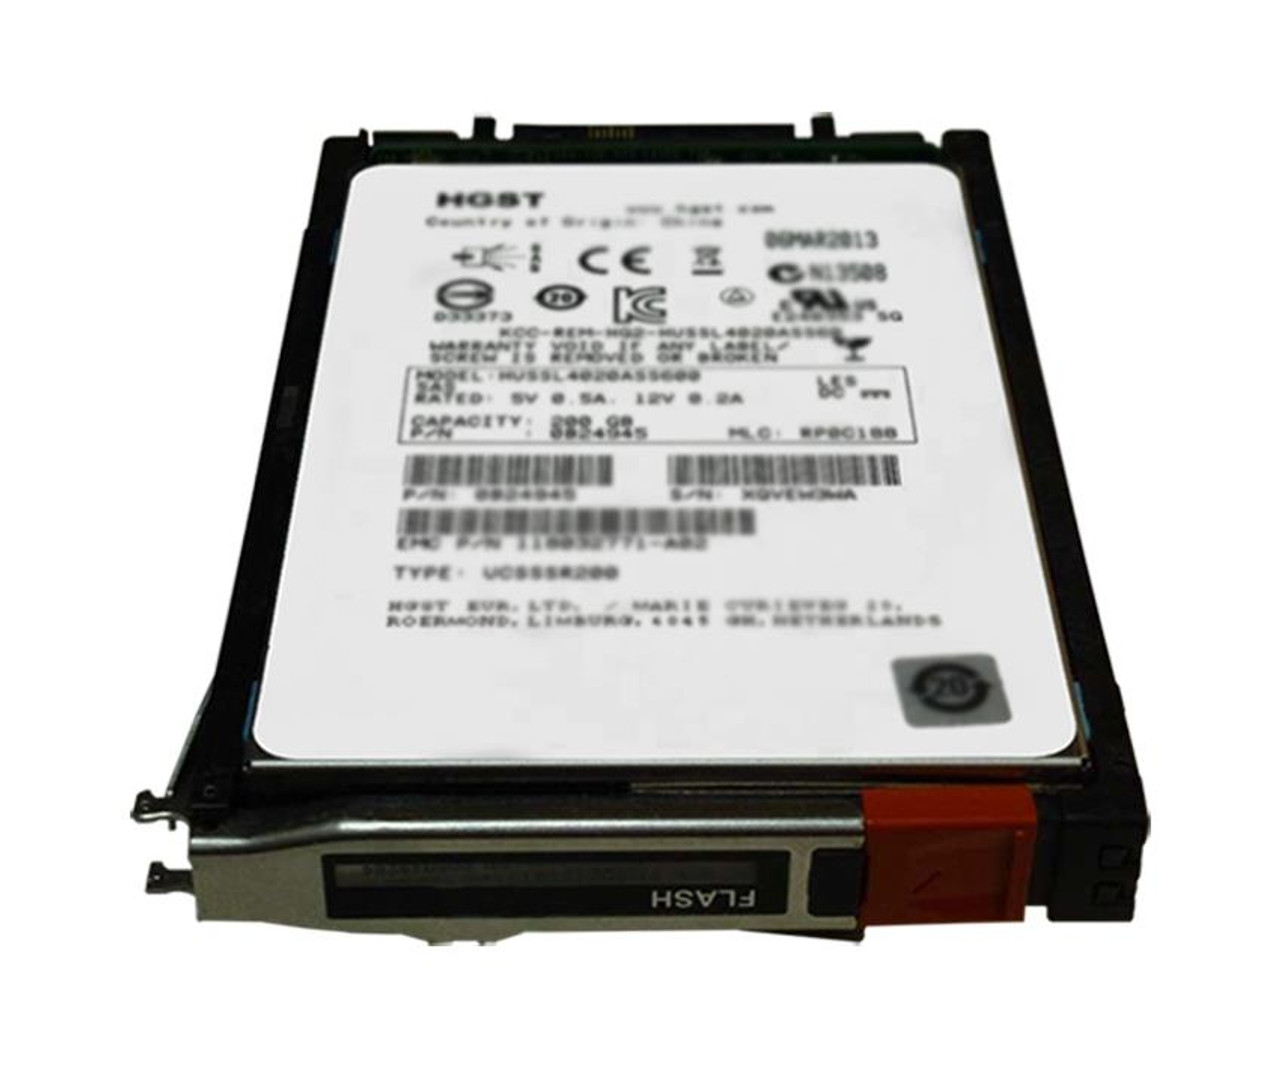 V6-2S6FX-200U EMC 200GB SAS 6Gbps 2.5-inch Internal Solid State Drive (SSD) Upgrade for VNXe3200 25 x 2.5 Enclosure